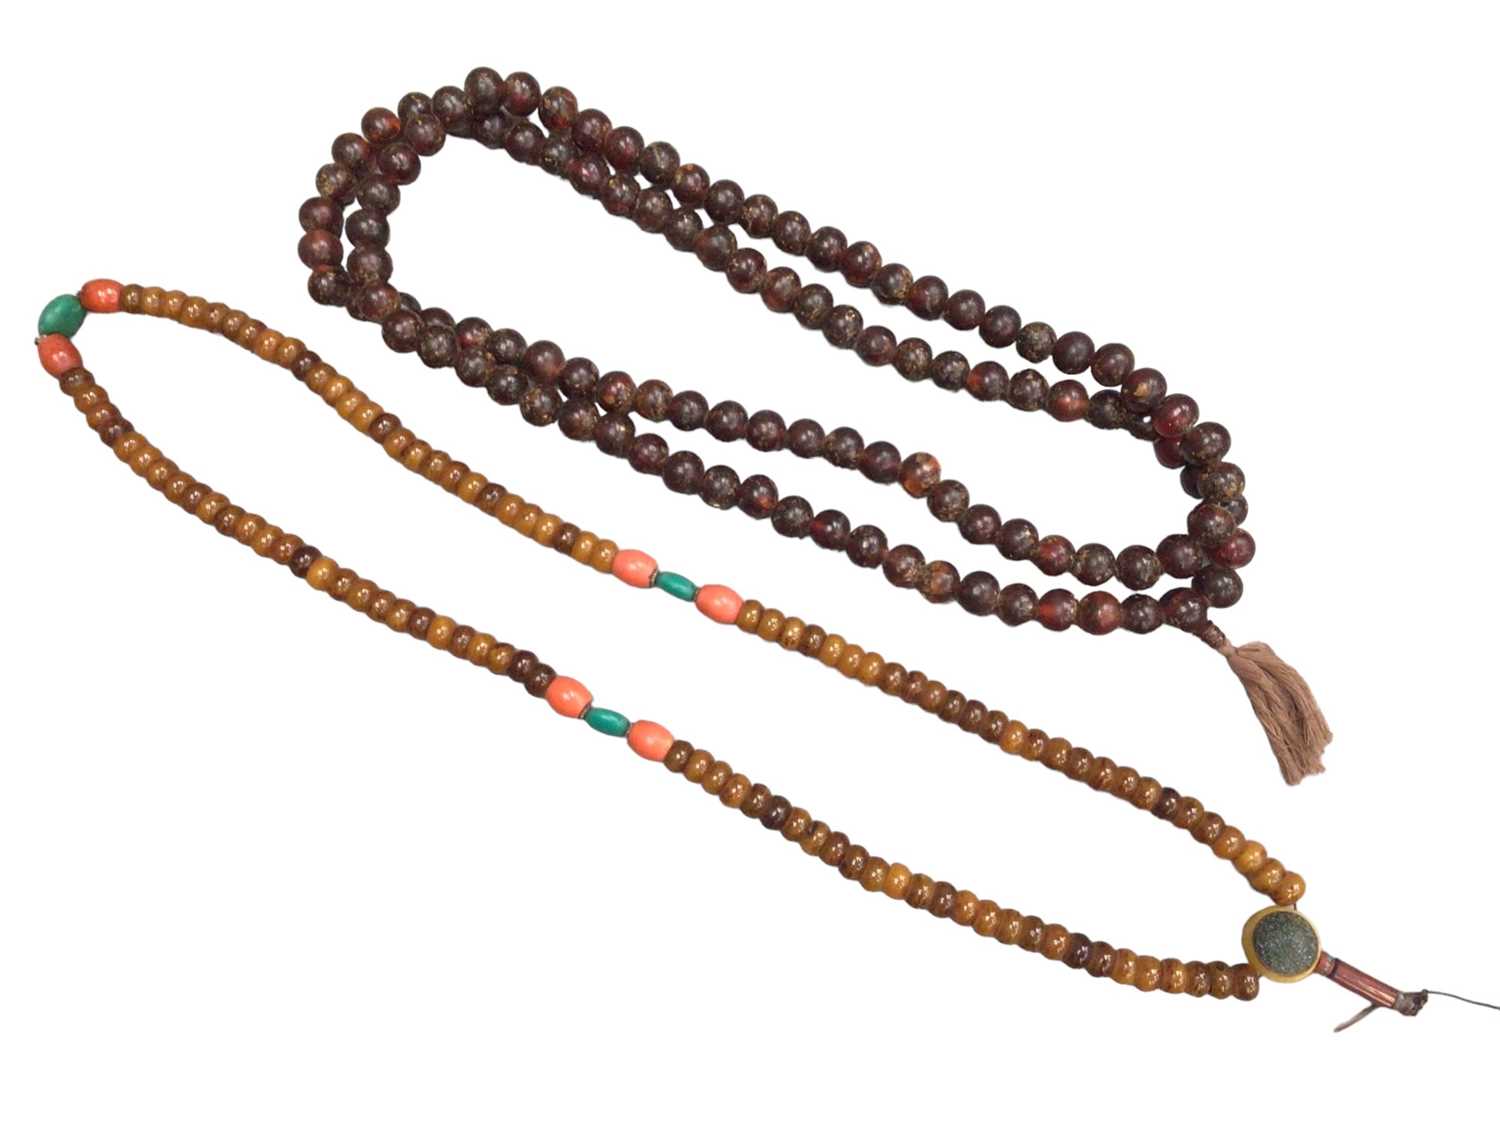 Two large Tibetan simulated and reconstituted amber prayer bead necklaces